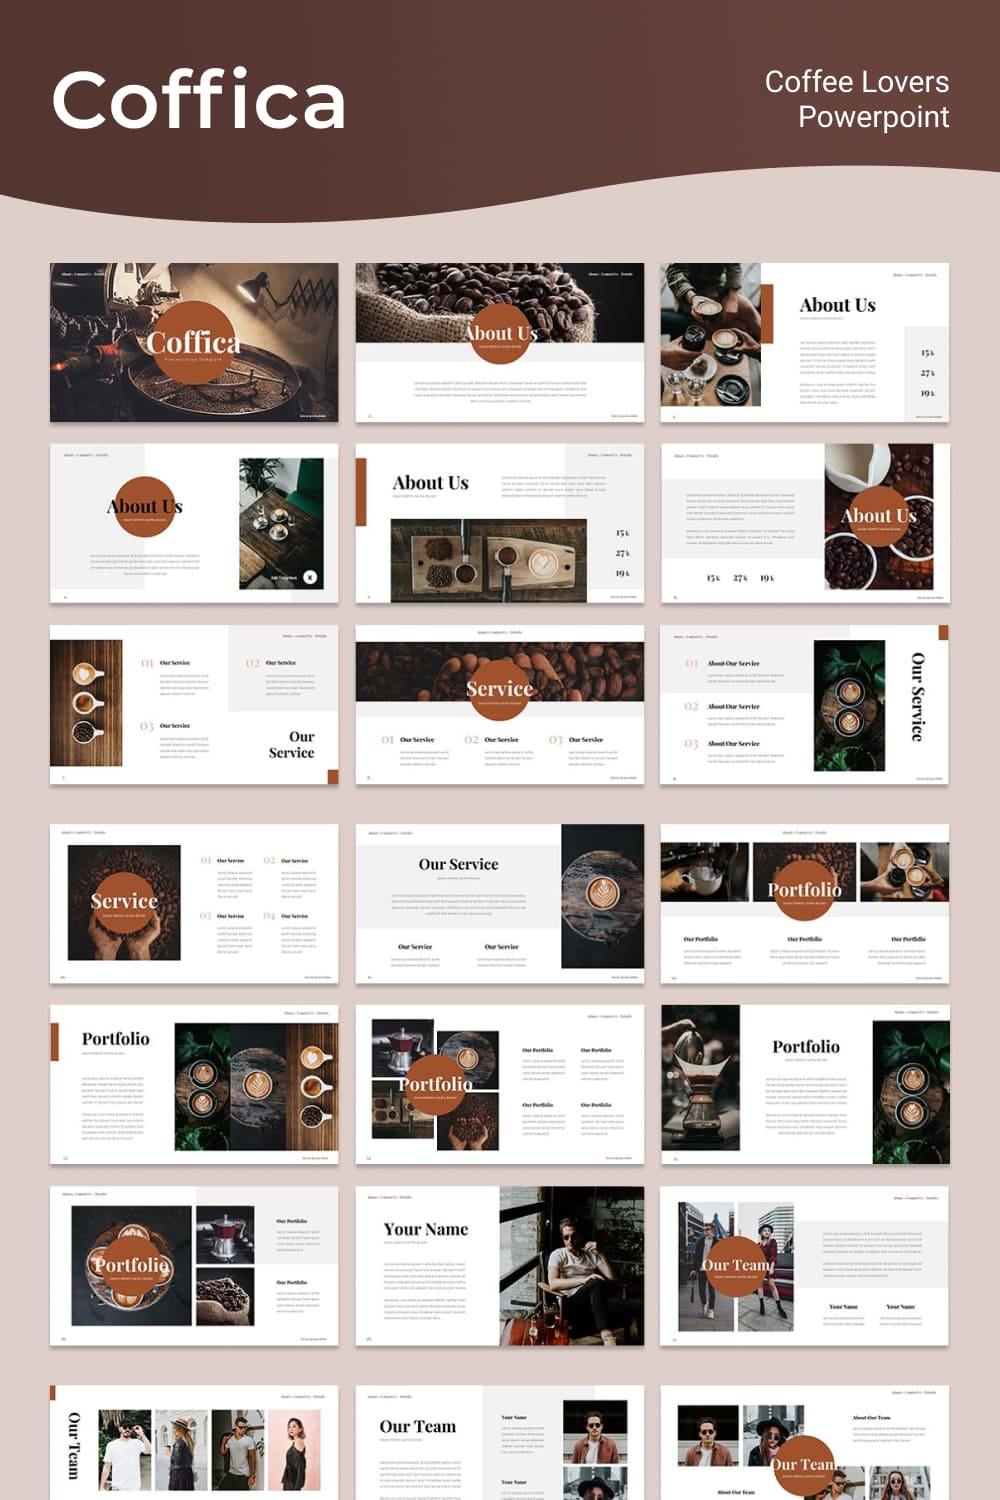 Coffica - Coffee Lovers Powerpoint - preview of Pinterest image.